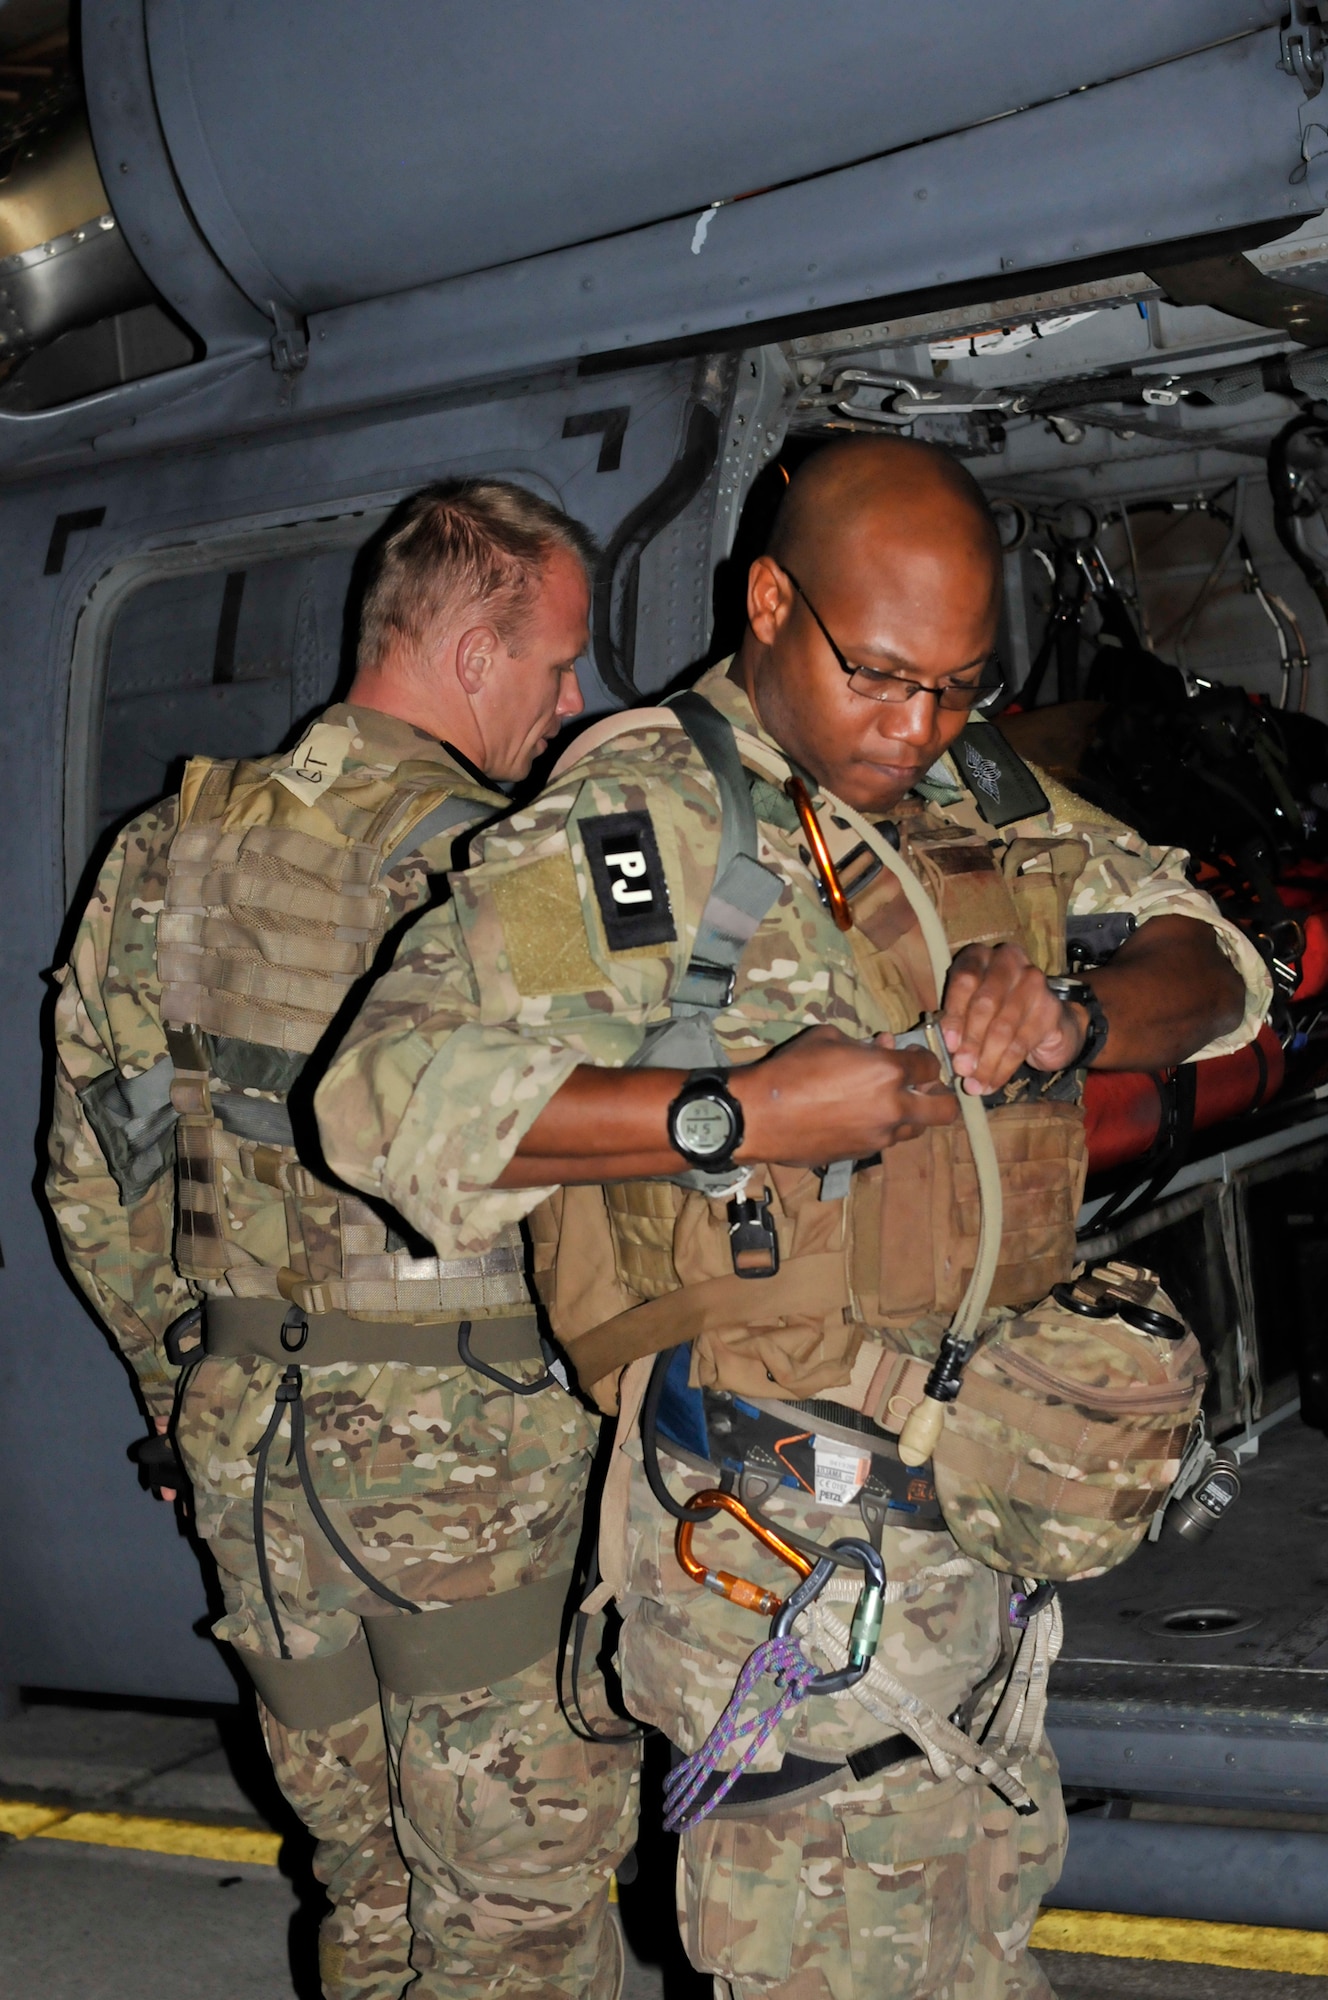 PATRICK AIR FORCE BASE, Fla. - Guardian Angel Weapons System Airmen from the 920th Rescue Wing here, Tech. Sgt. Adrian Durham (Right) and Master Sgt. Jon Grant, pararescuemen, prepare for astronaut rescue prior to boarding an HH-60 Pave Hawk helicopter May 16, 2011 prior to the launch of Space Shuttle Endeavor. (U.S. Air Force photo/Staff Sgt. Anna-Marie Wyant)